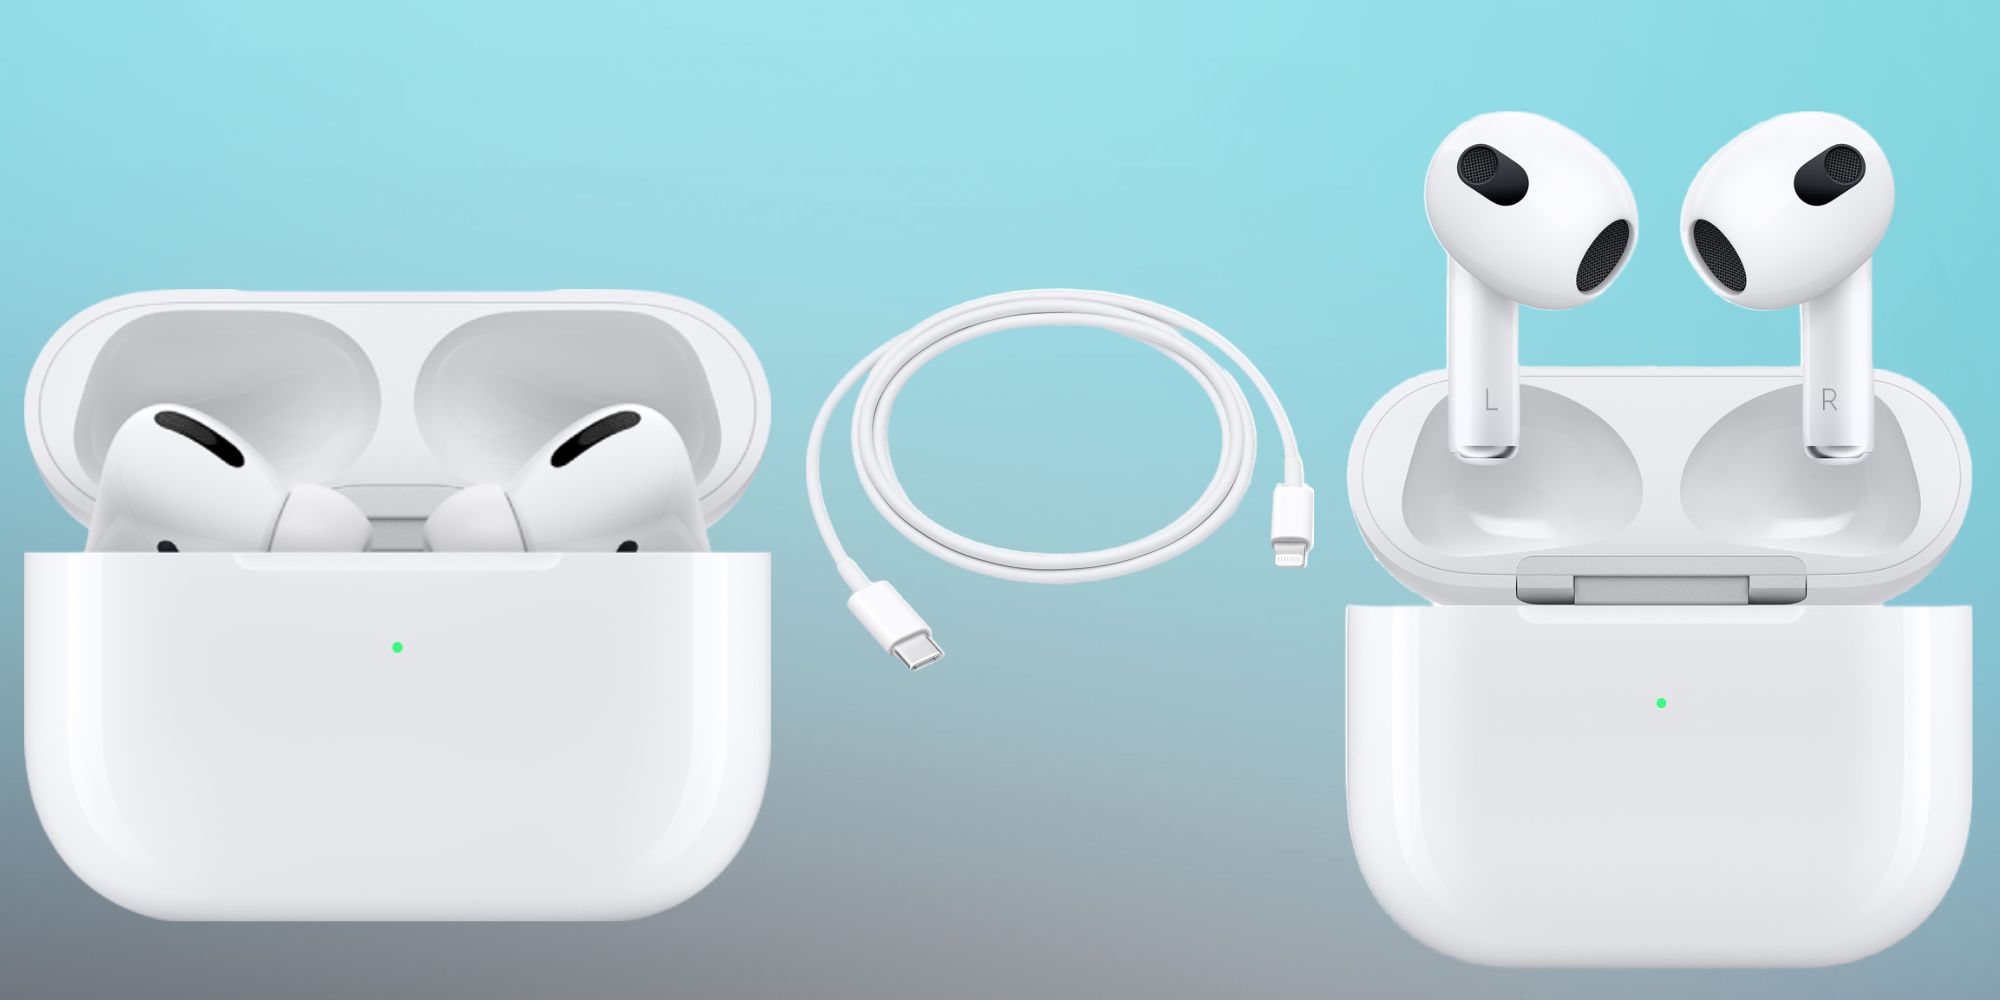 AirPods Pro, a lightning to usb-c cable, and airpods are pictured with a blue and gray background